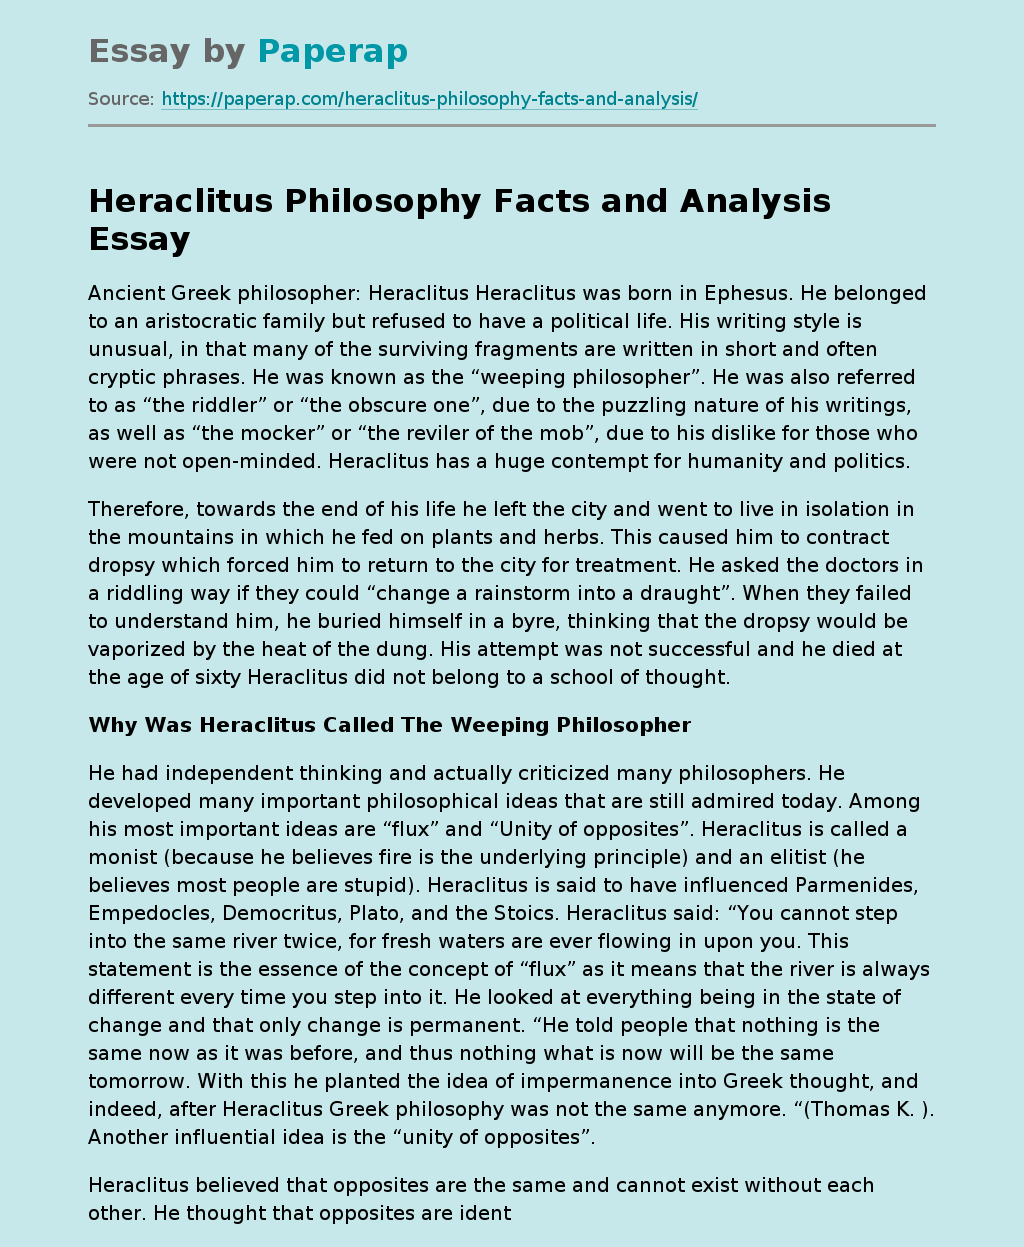 Heraclitus Philosophy Facts and Analysis